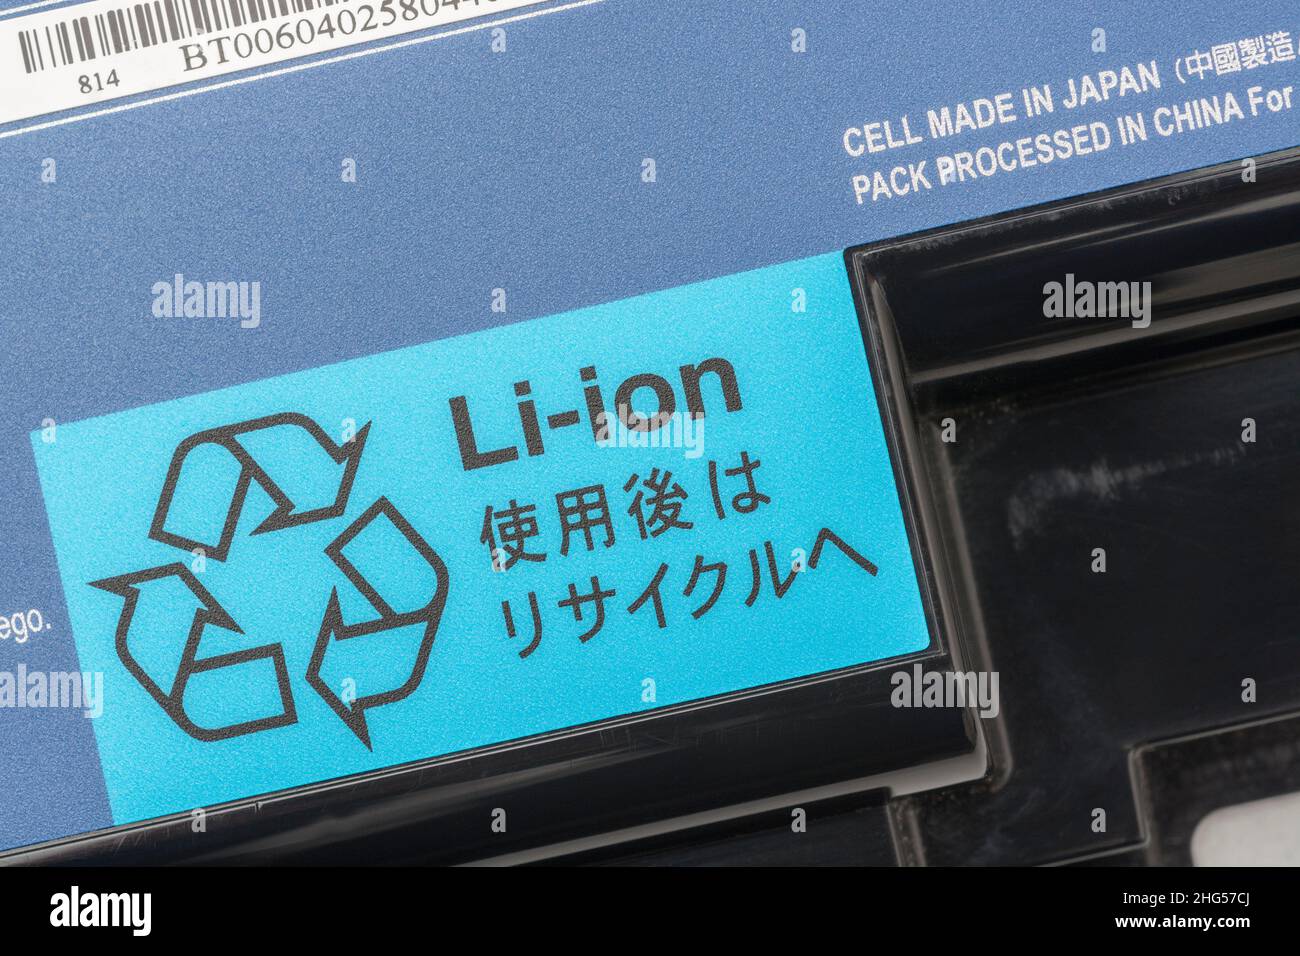 Old Lithium-ion / Li-ion laptop computer battery with Mobius Loop recycling symbol prominent. For battery recycling, hazardous materials. Stock Photo